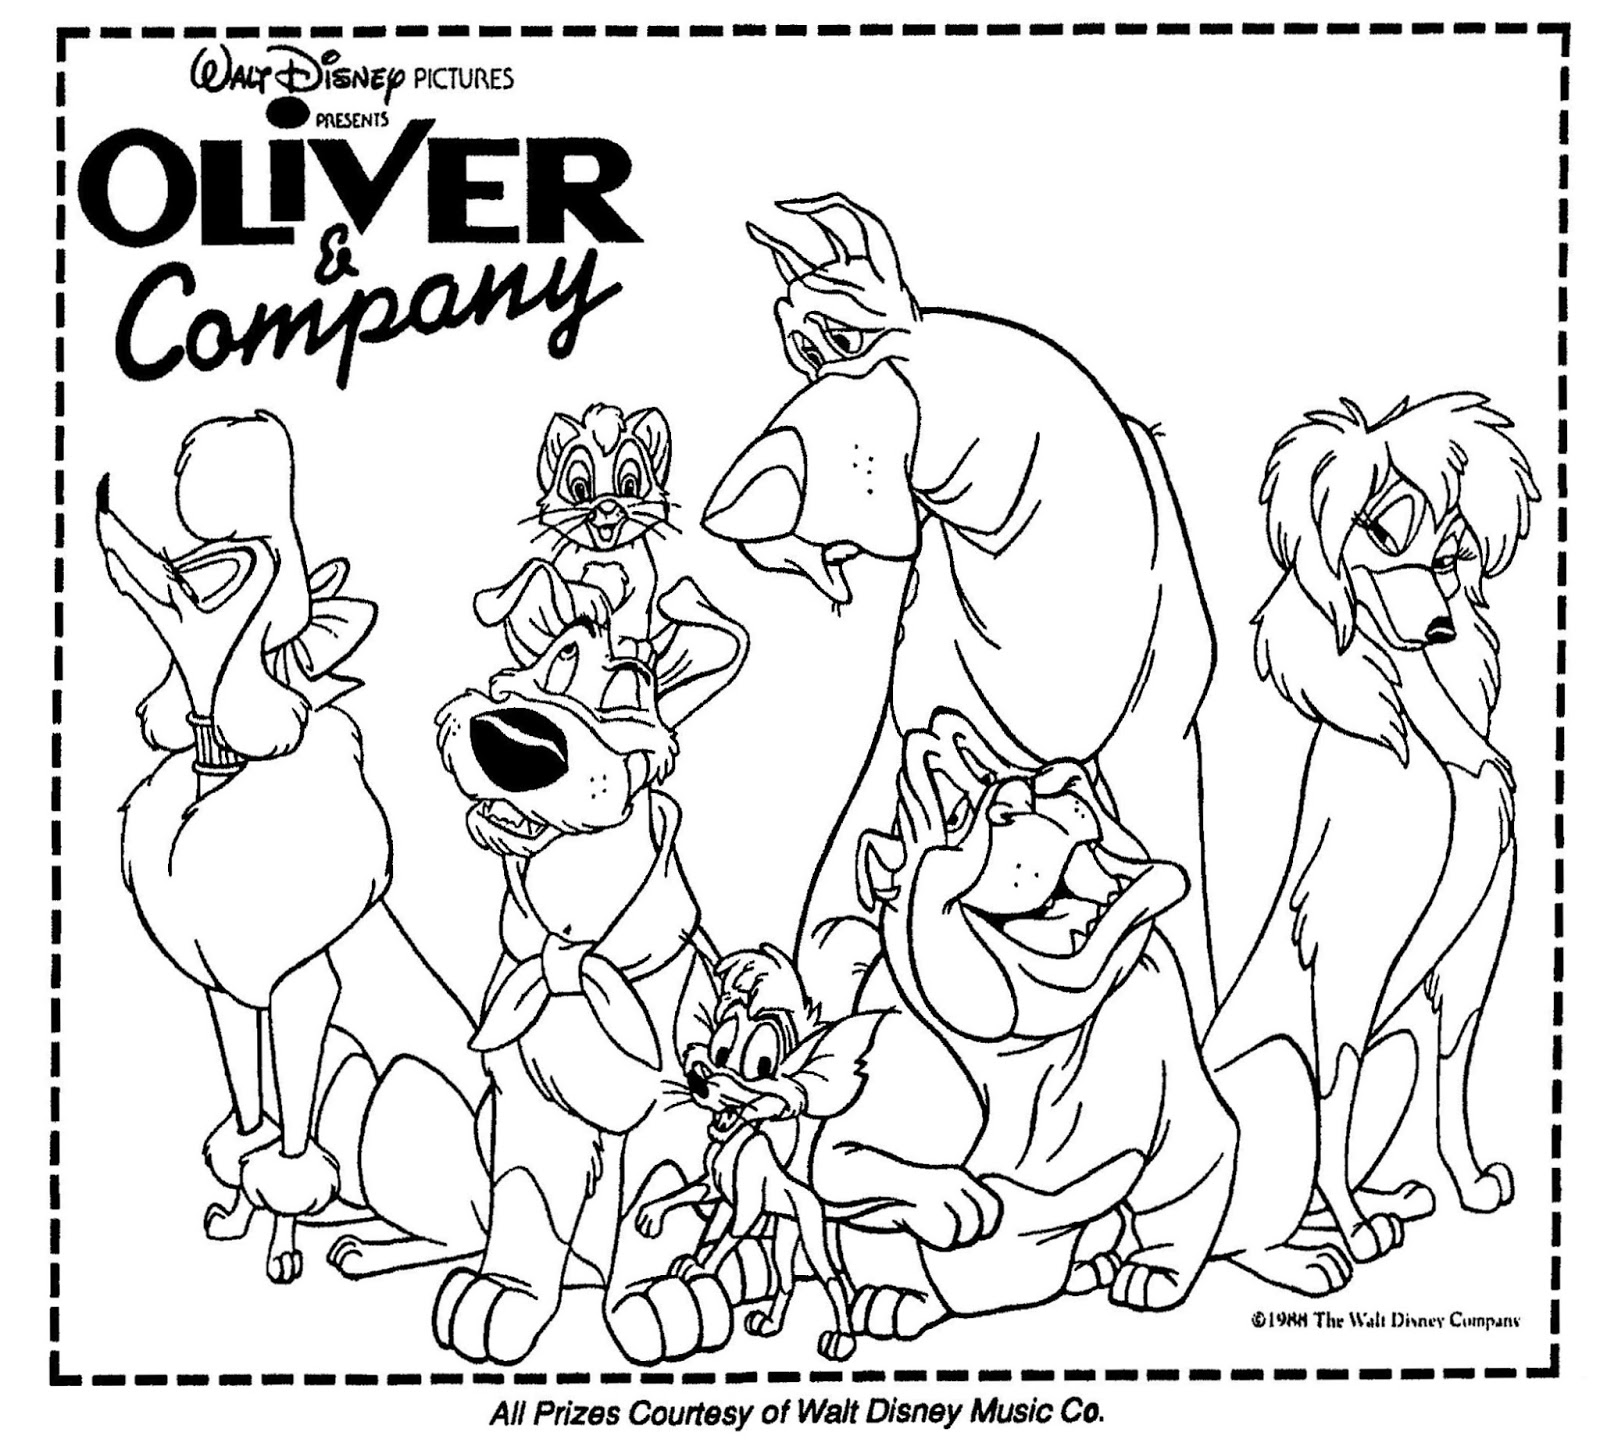 Mostly Paper Dolls Too! OLIVER & Company, A Movie